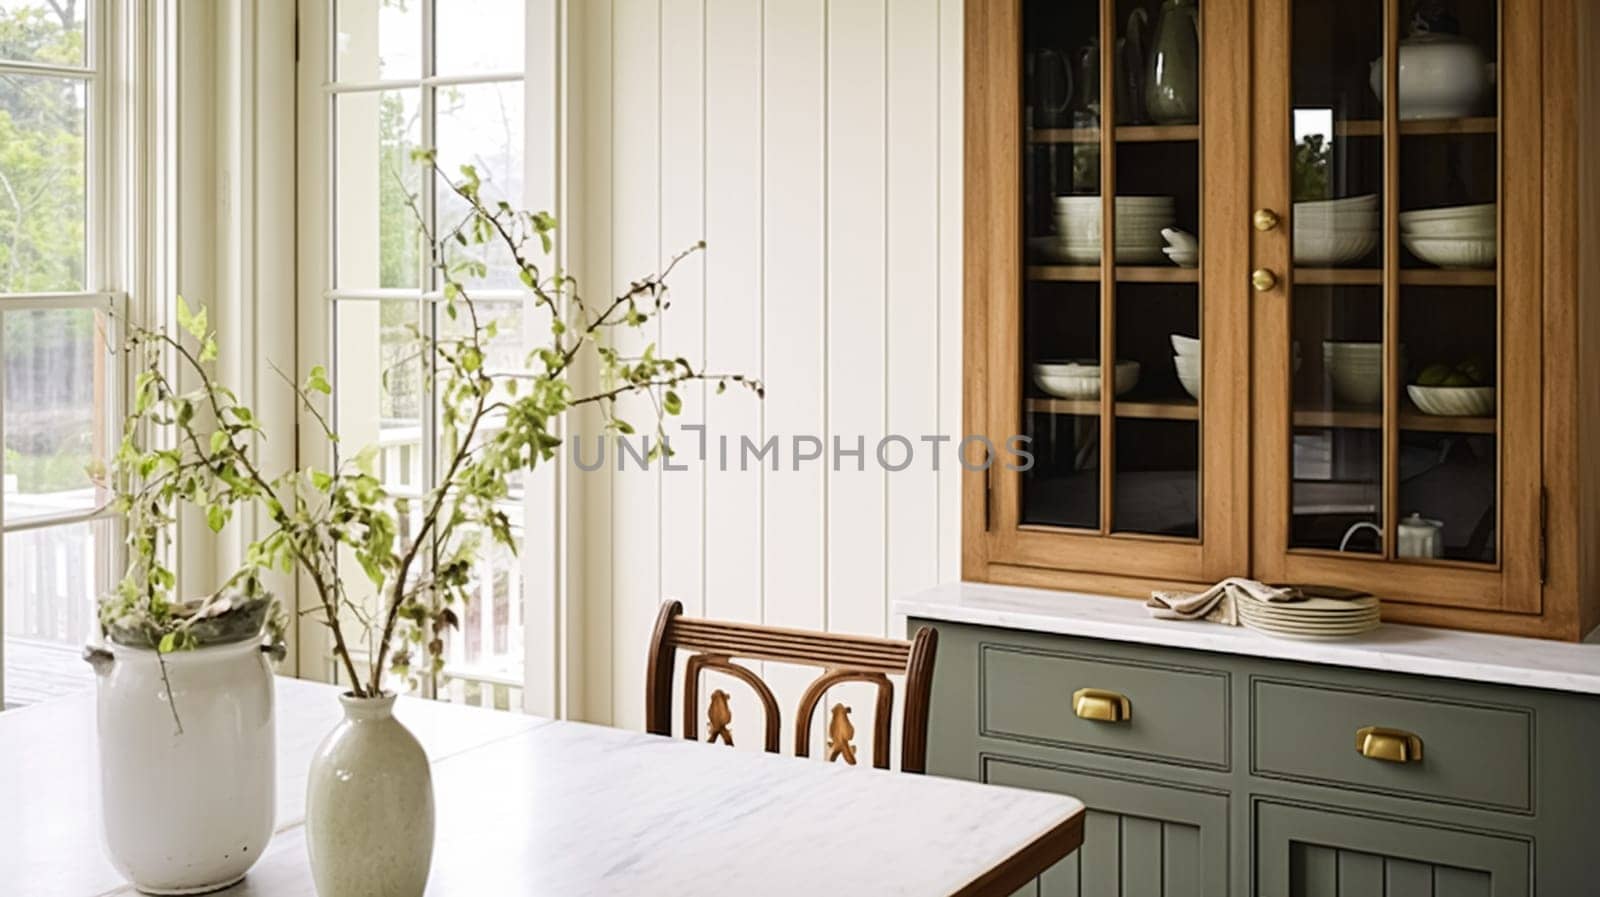 Elegant cottage dining room decor and interior design, country furniture and home decor, English countryside house style interiors